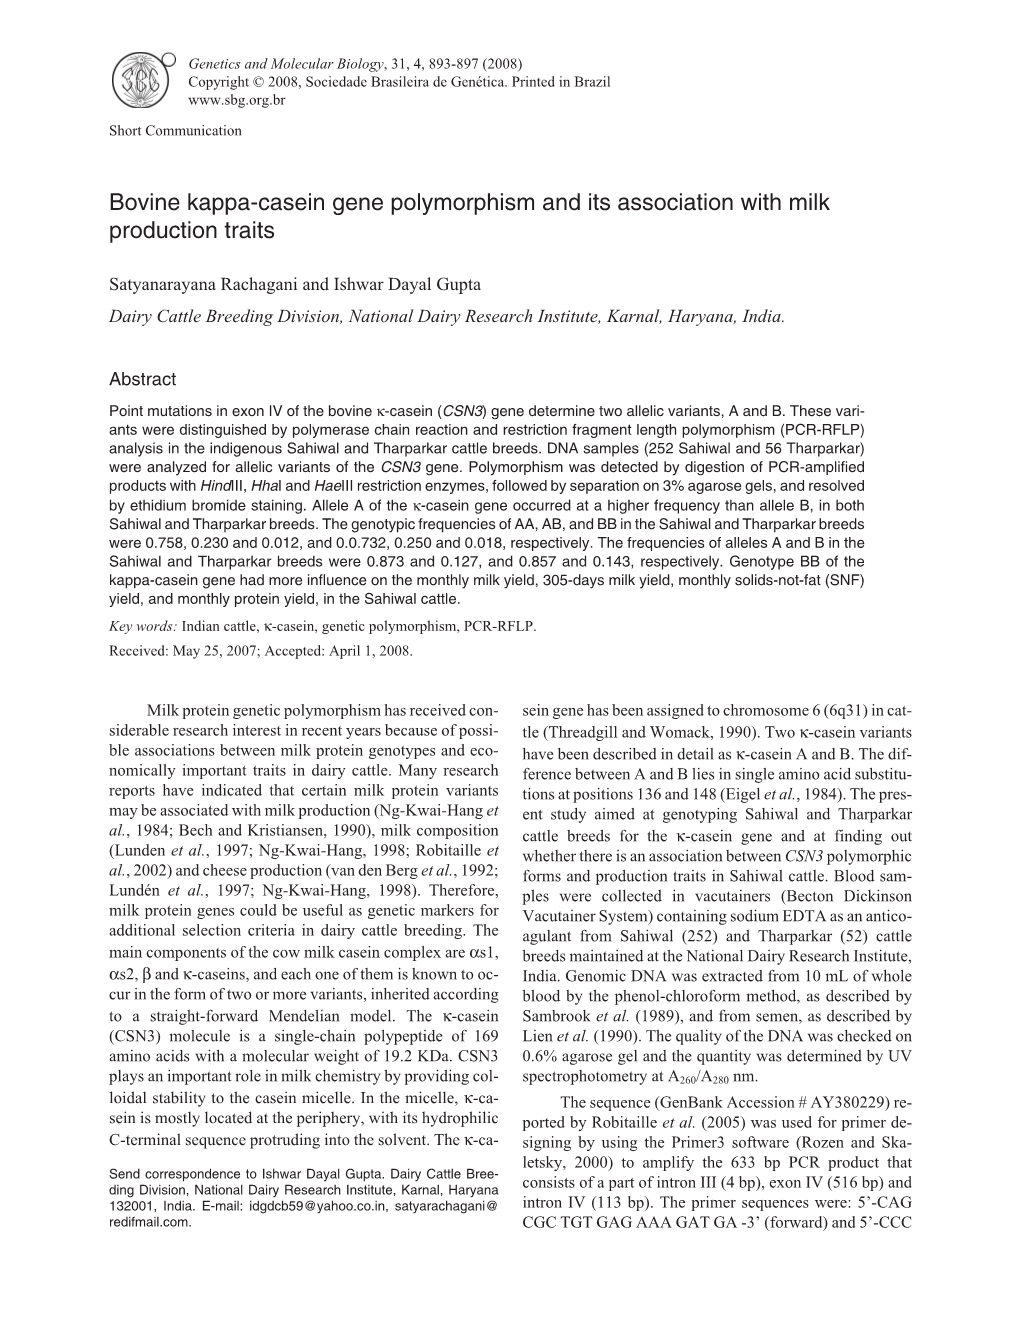 Bovine Kappa-Casein Gene Polymorphism and Its Association with Milk Production Traits